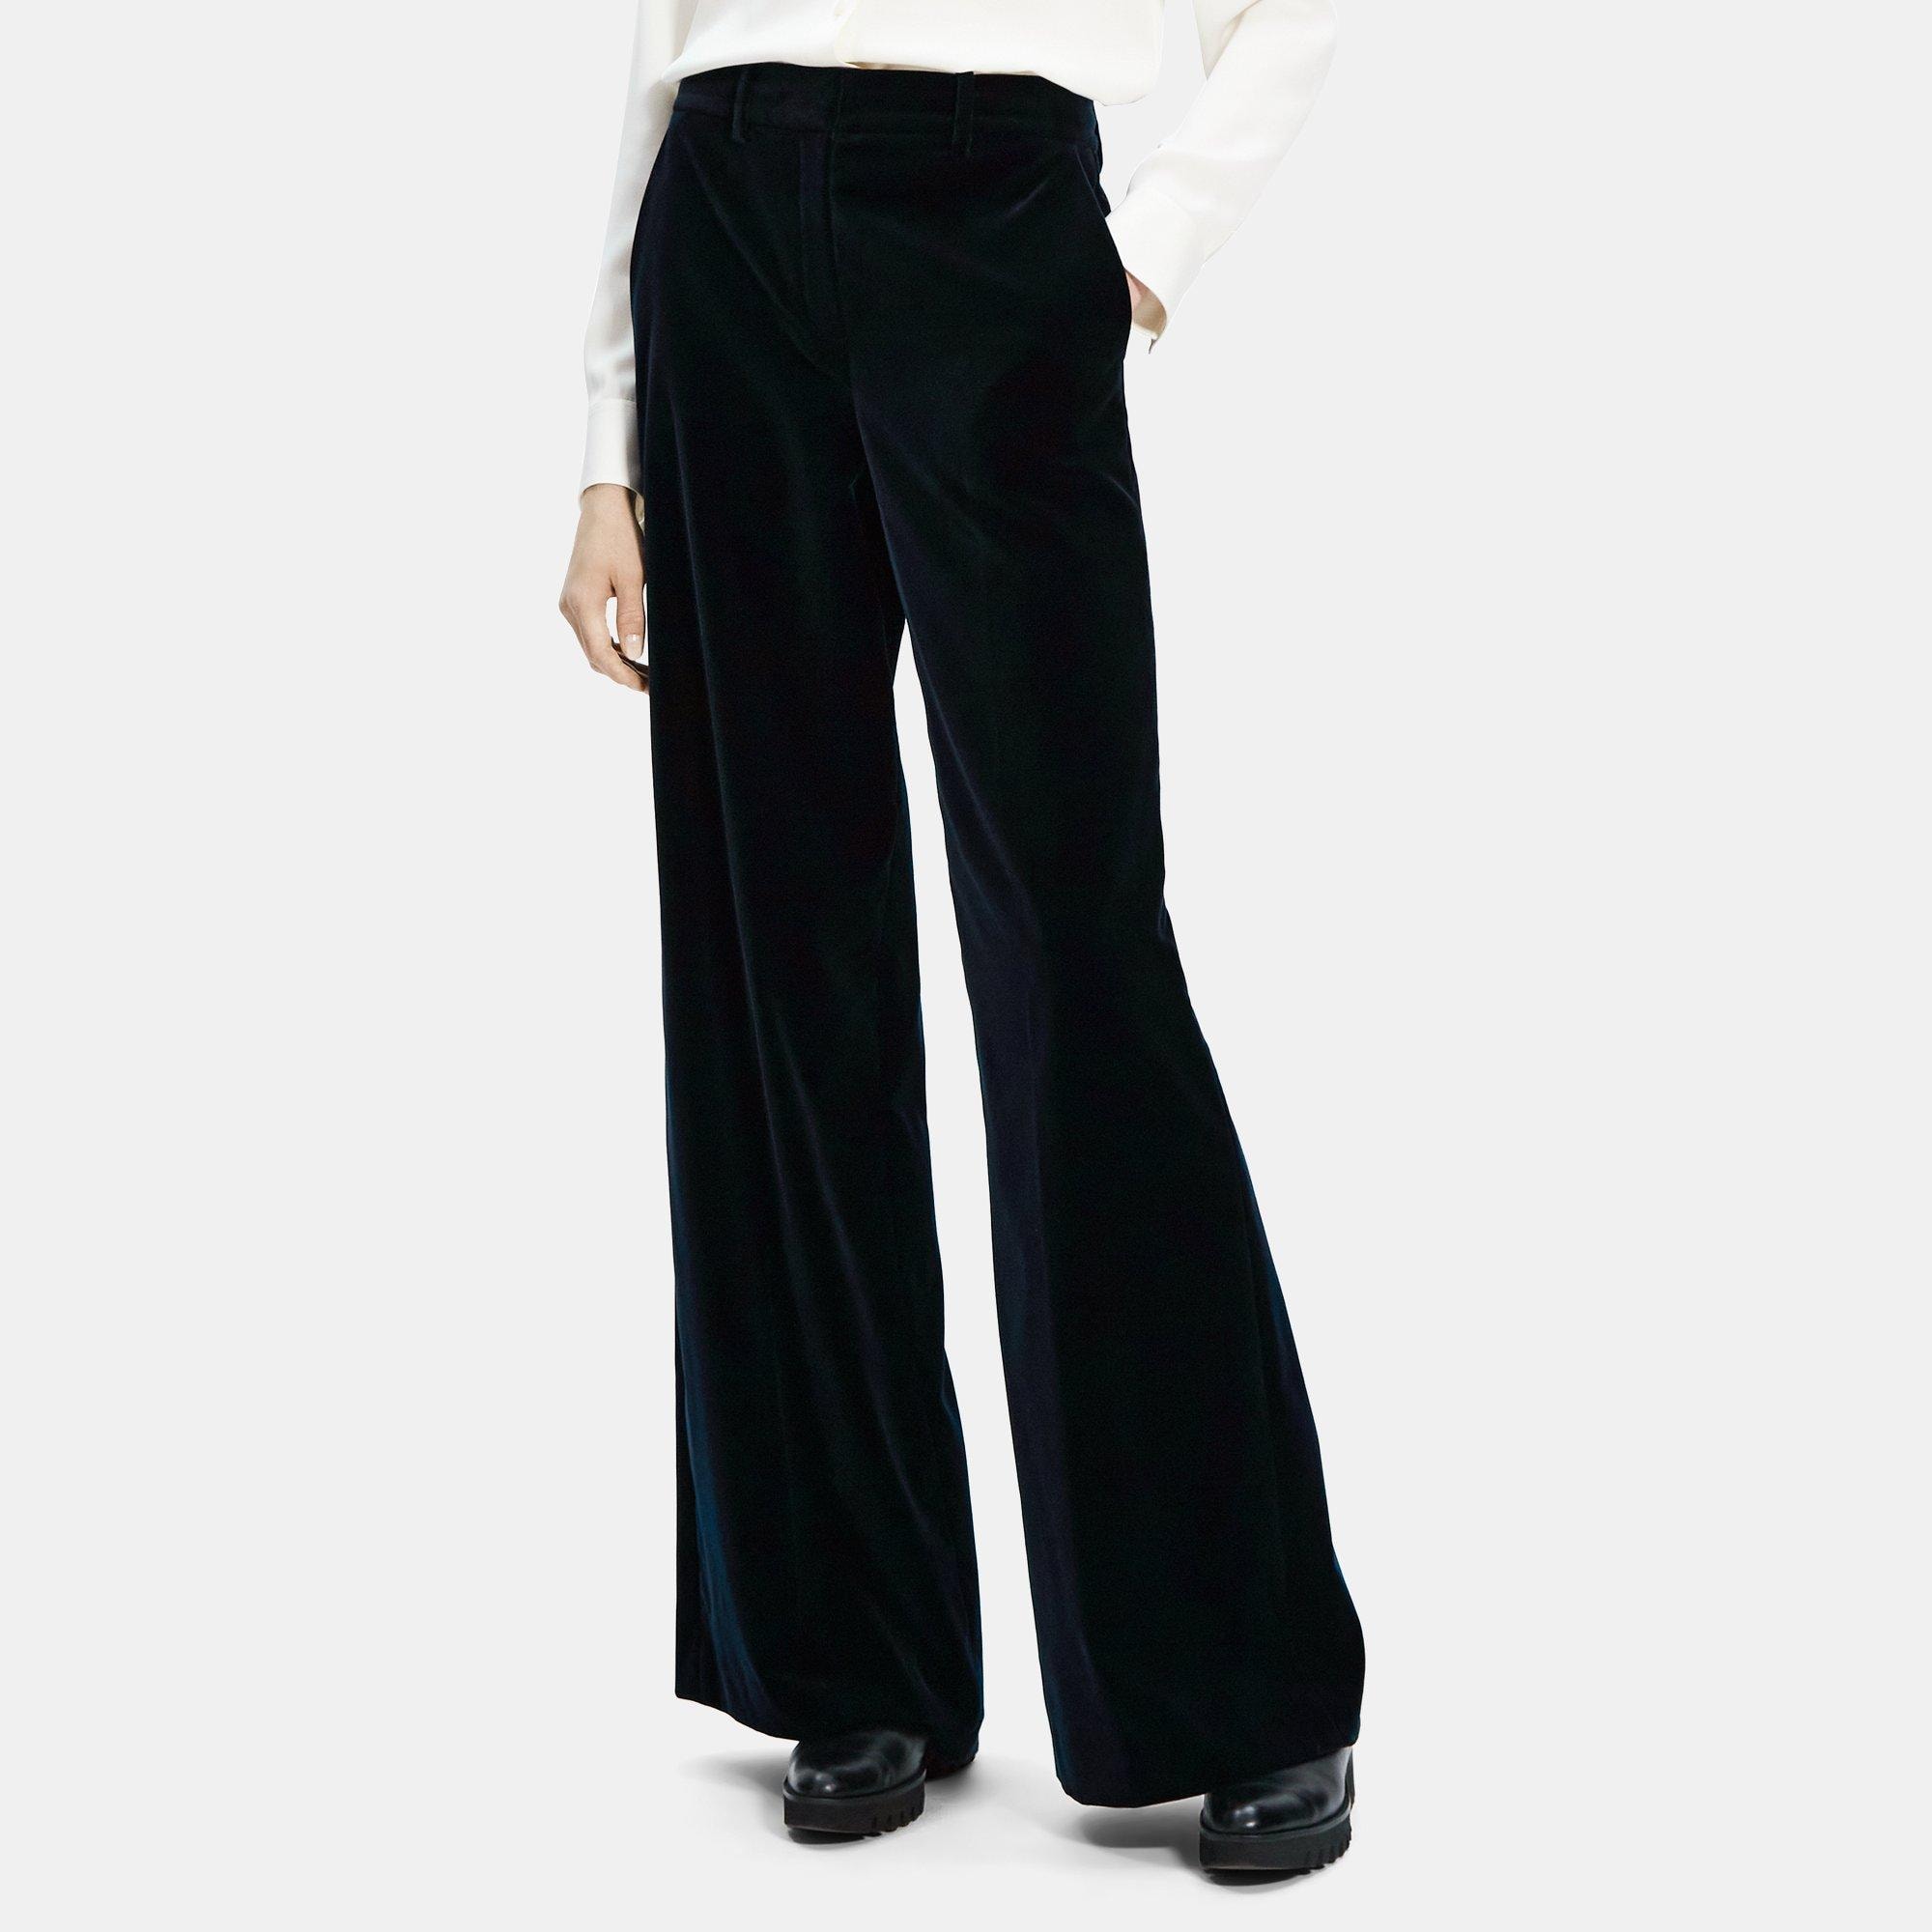 Stretch Velvet Flared High-Waist Pant | Theory Outlet